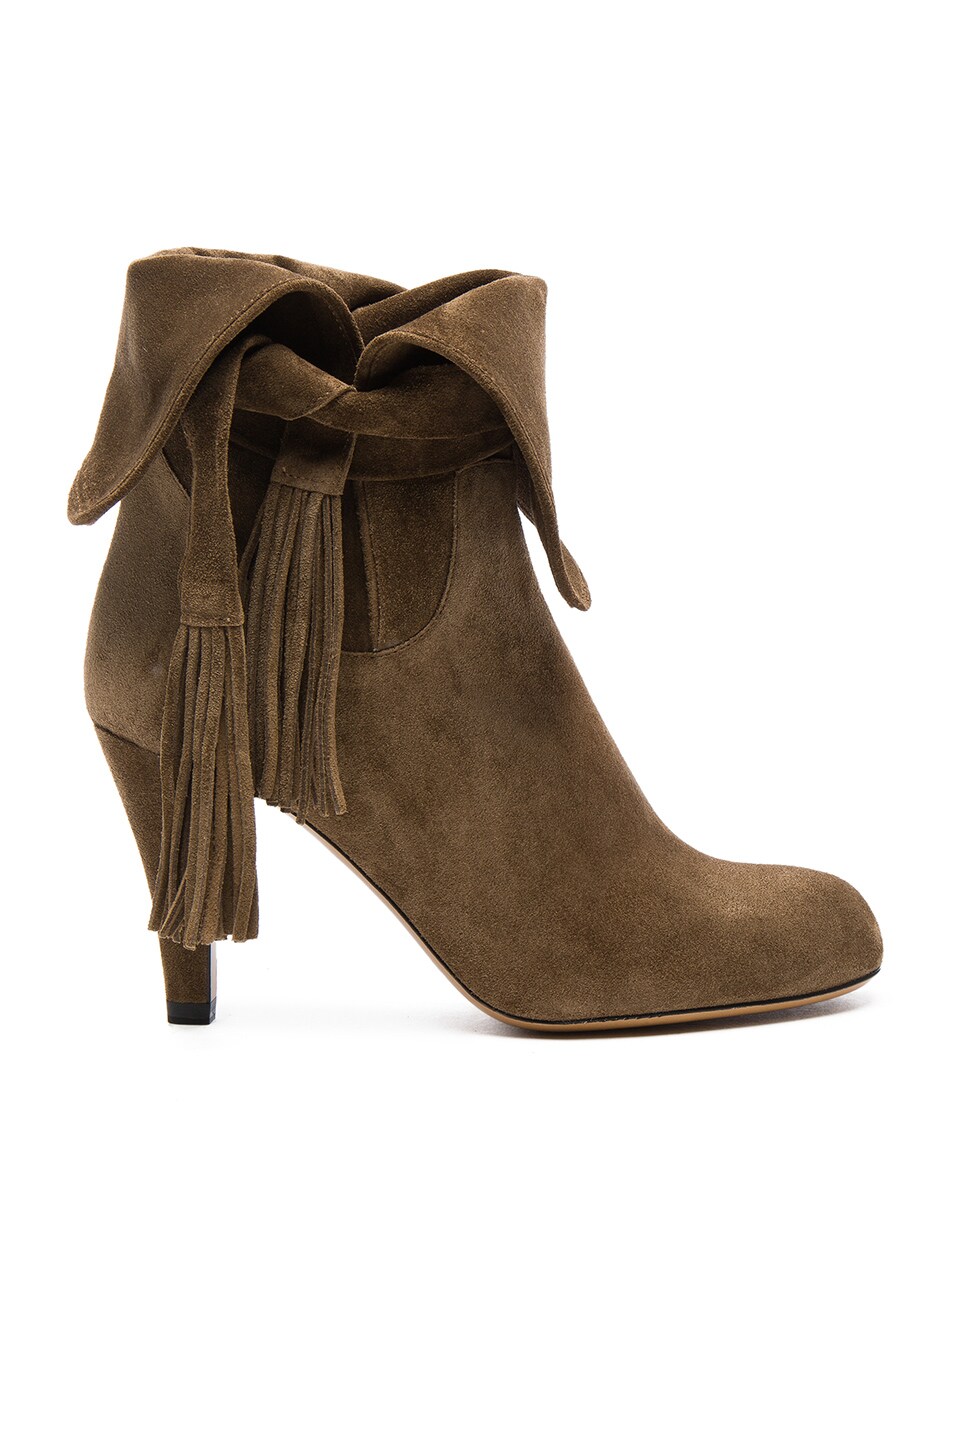 Image 1 of Chloe Suede Tassel Boots in Military